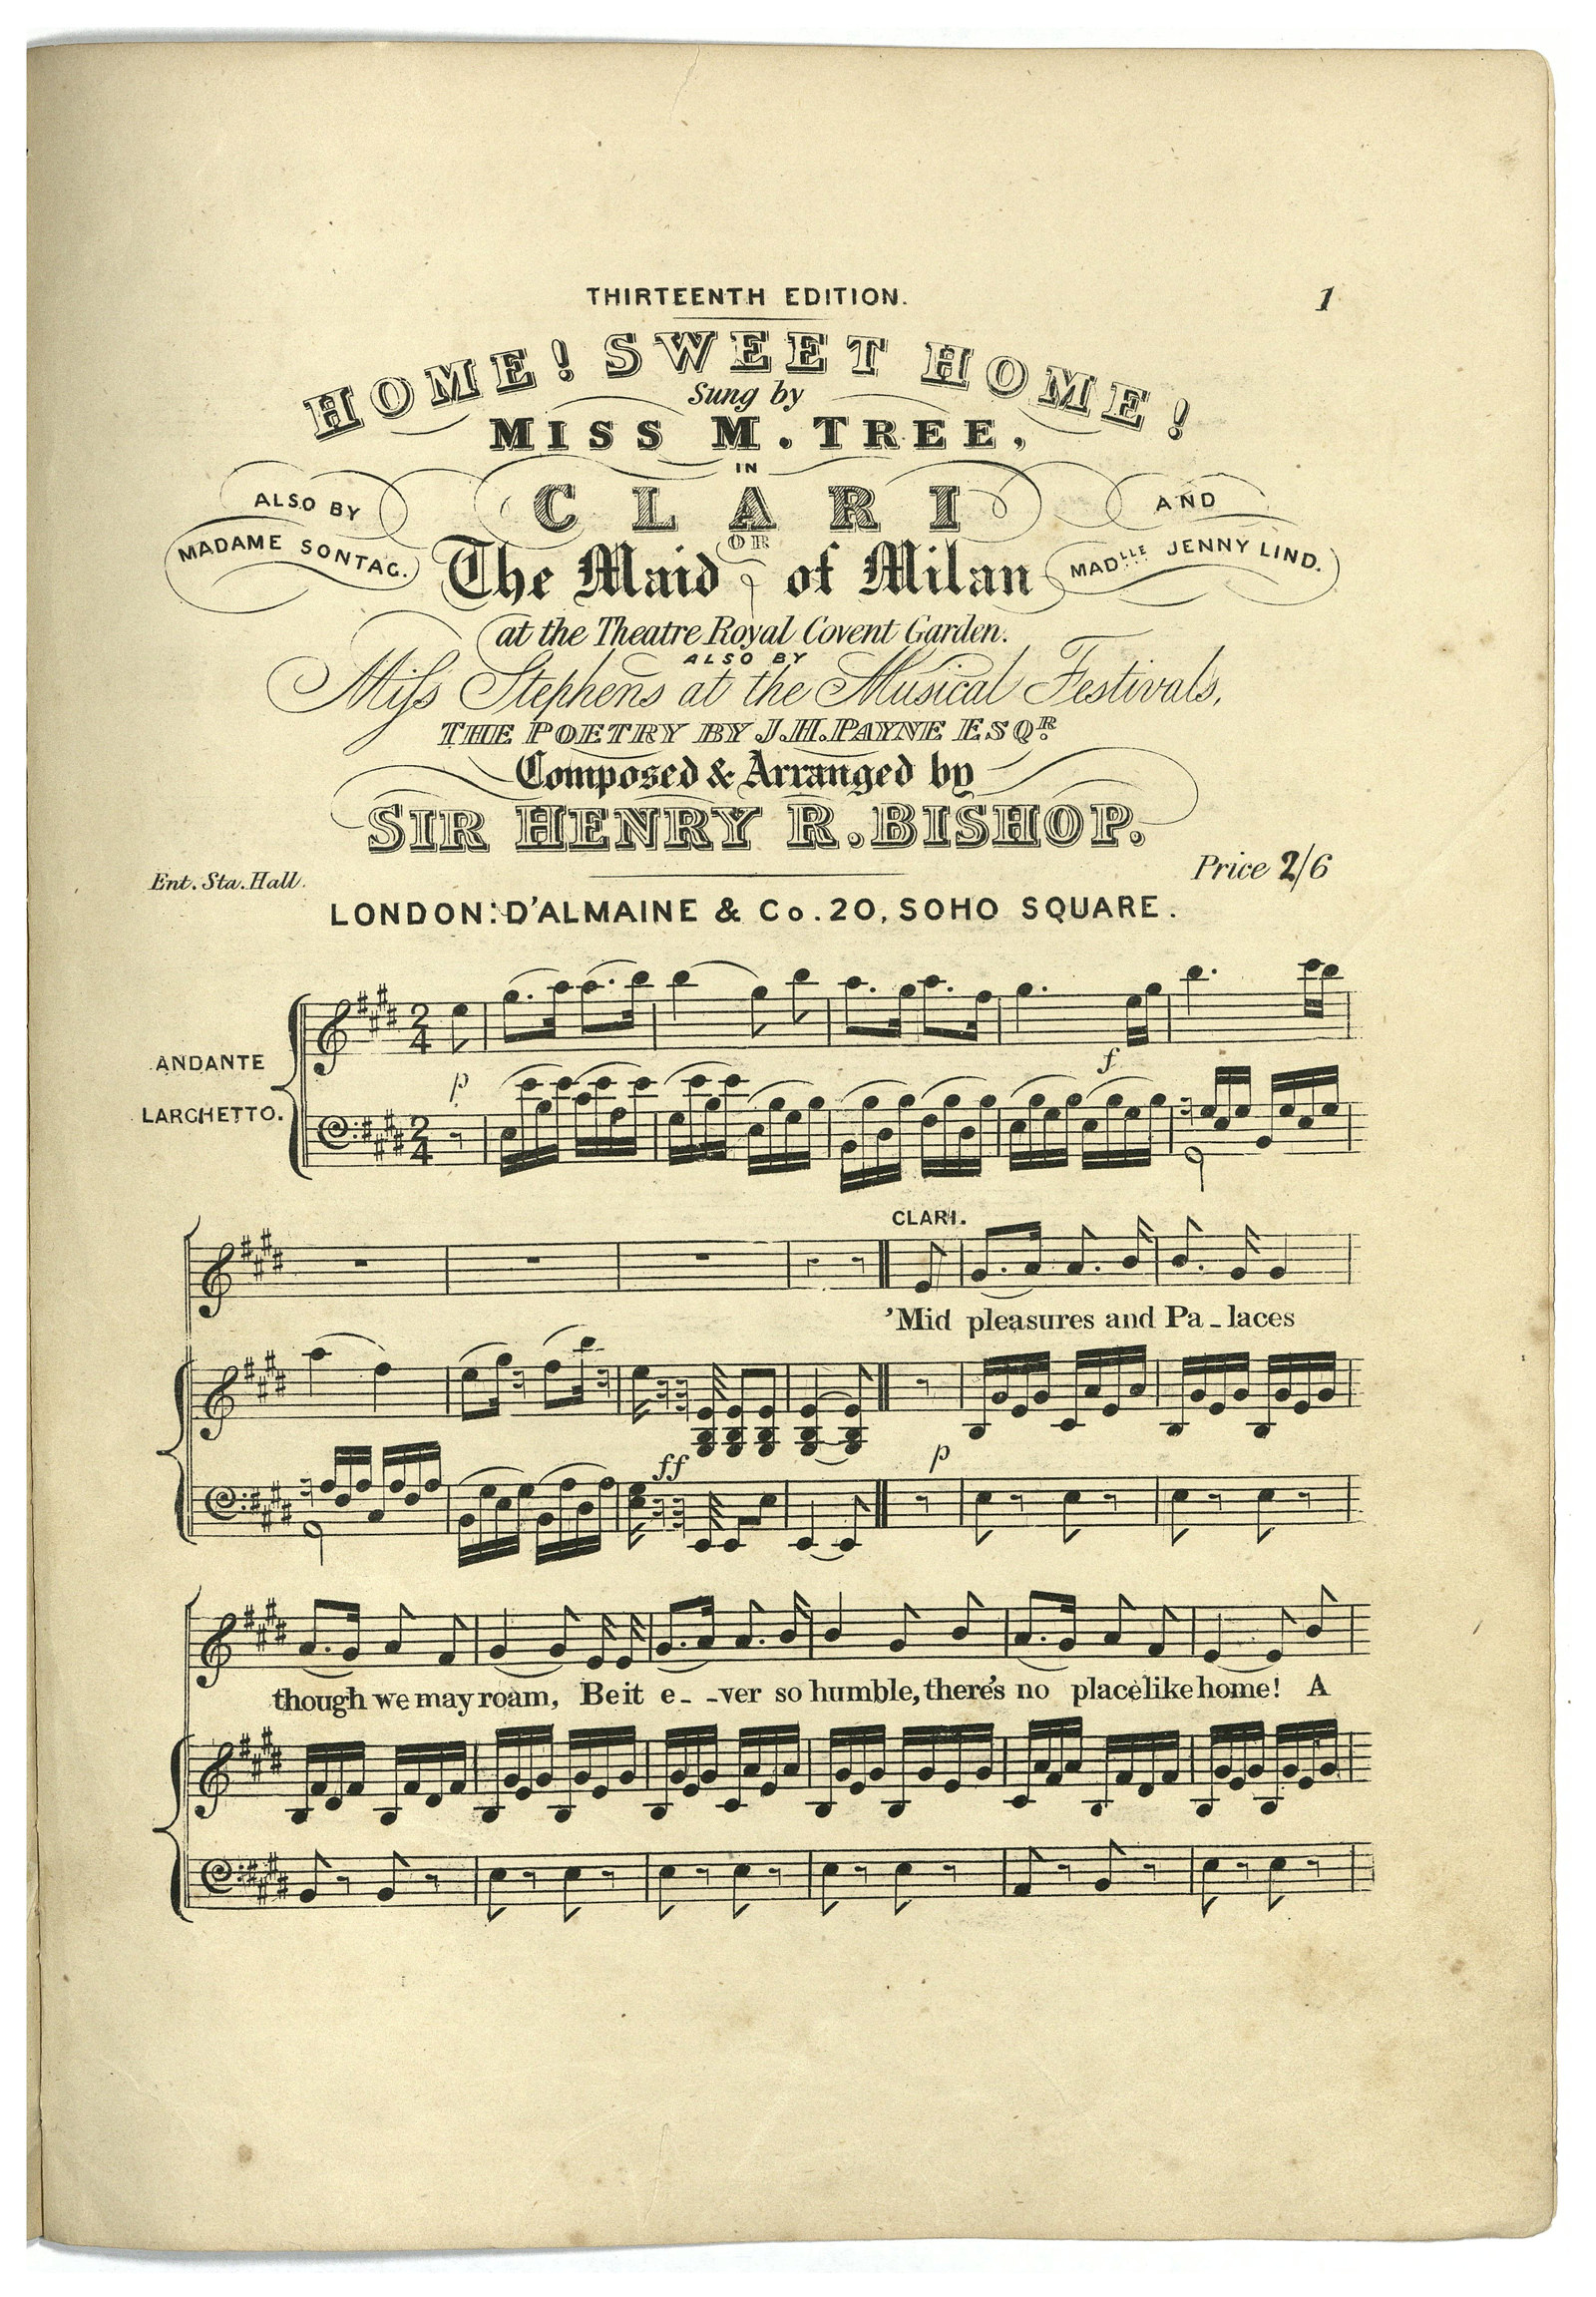 Owner bound volume of assorted songs, in the collection of Rouse Hill House & Farm, 1850-1864. [music]